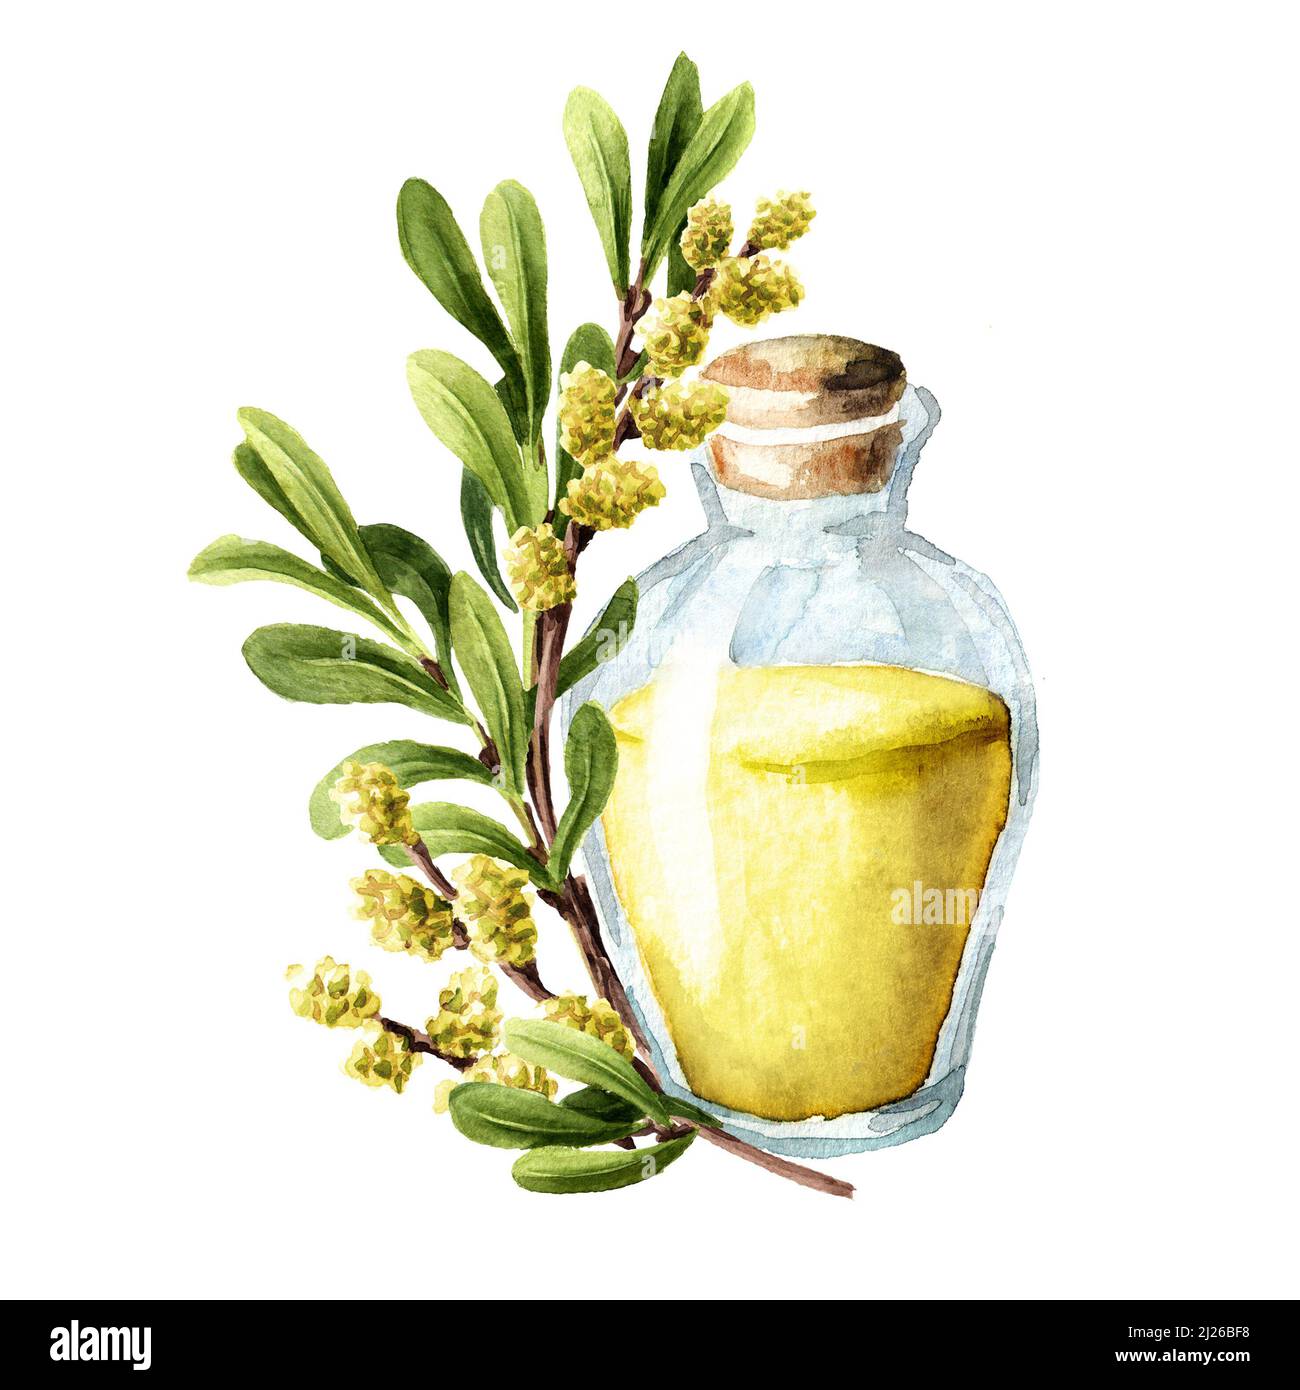 Bog myrtle essential  oil, medicinal plant. Hand drawn watercolor illustration,  isolated on white background Stock Photo